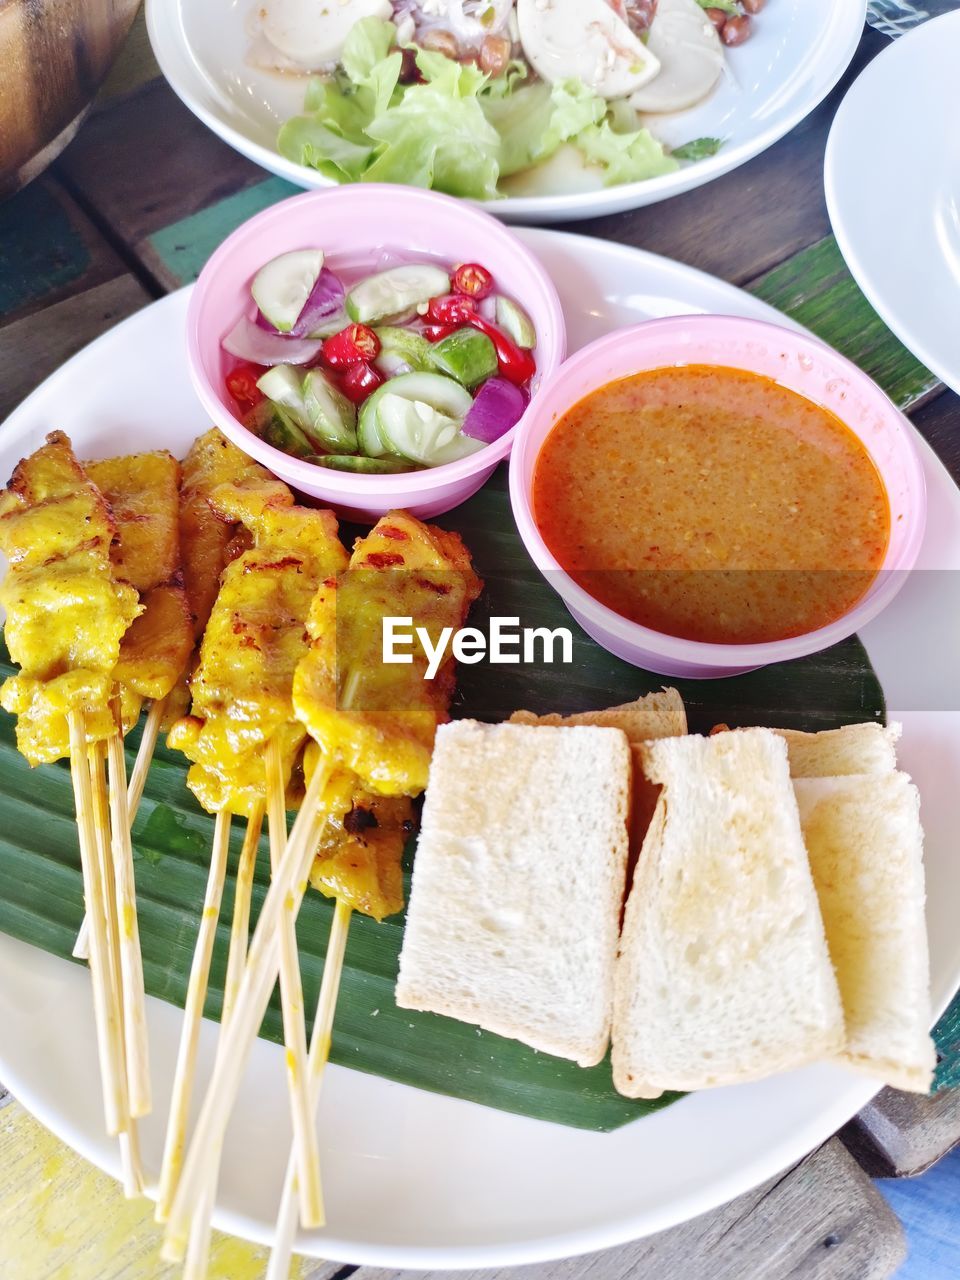 food and drink, food, healthy eating, plate, vegetable, wellbeing, freshness, dish, meal, high angle view, bowl, table, cuisine, no people, lunch, salad, asian food, sauce, fruit, breakfast, savory food, meat, condiment, indoors, satay, fast food, crockery, eating utensil